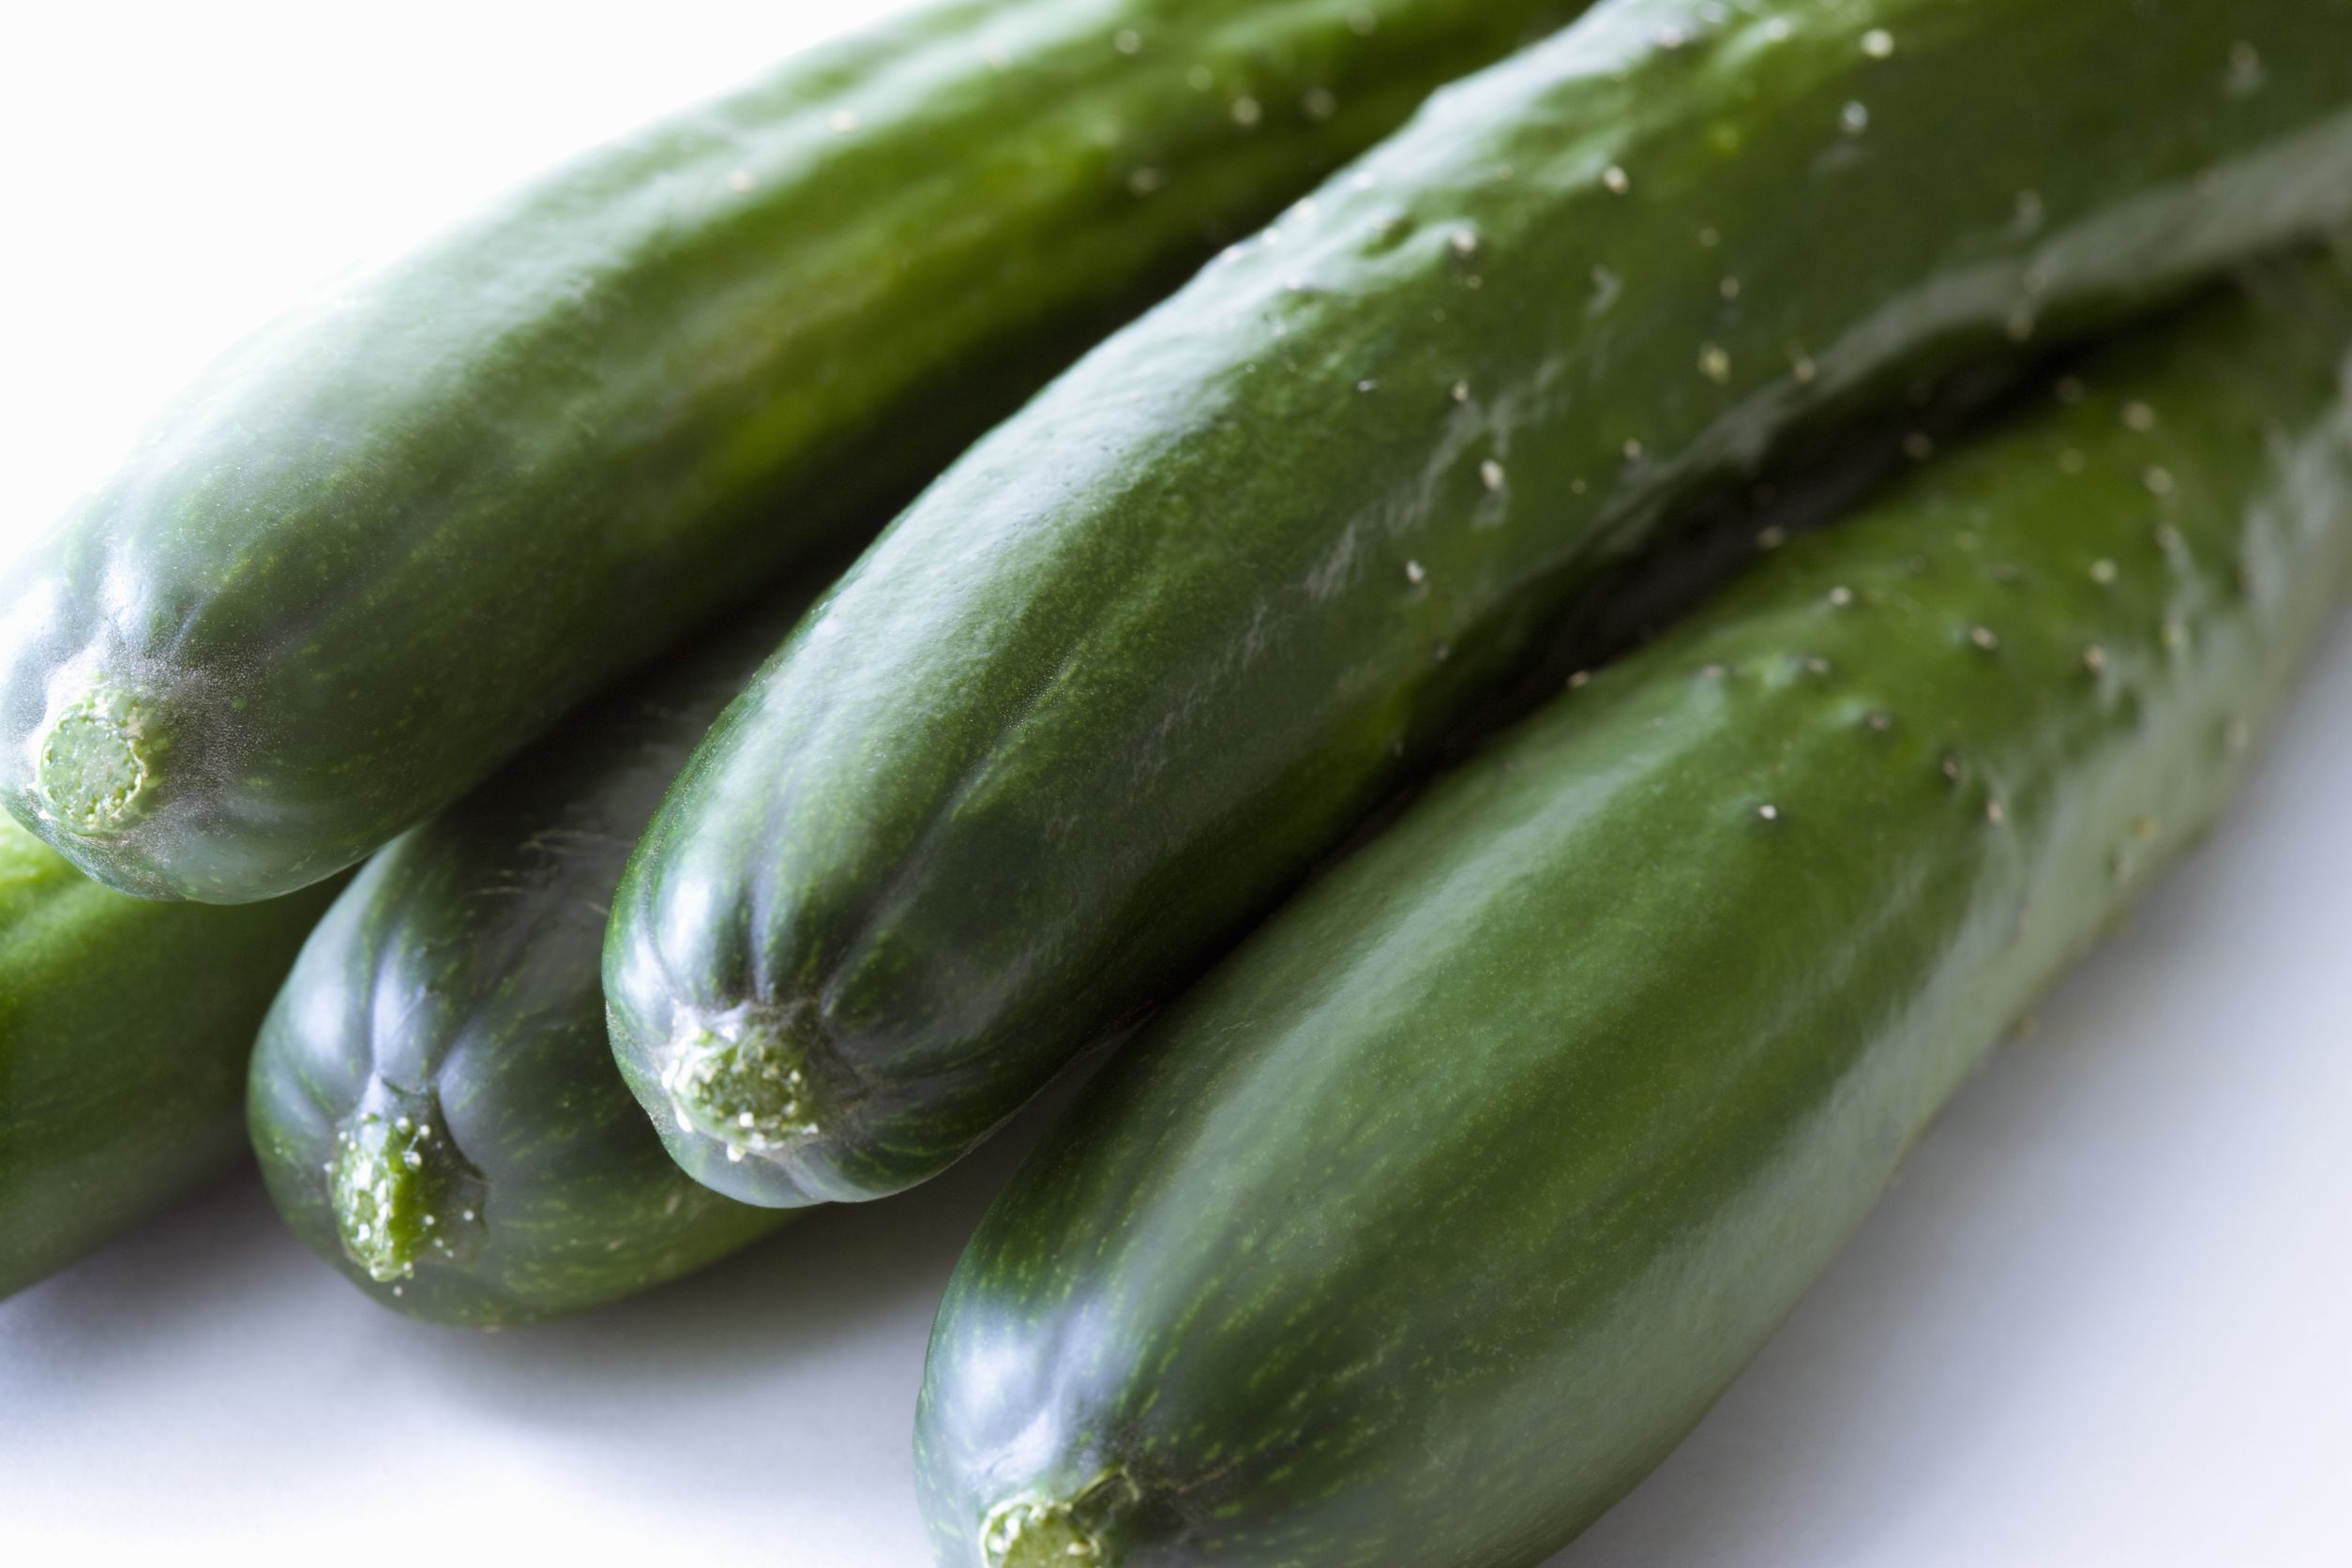 Fresh Start Issues Recall of Cucumbers Due to Potential Salmonella Contamination